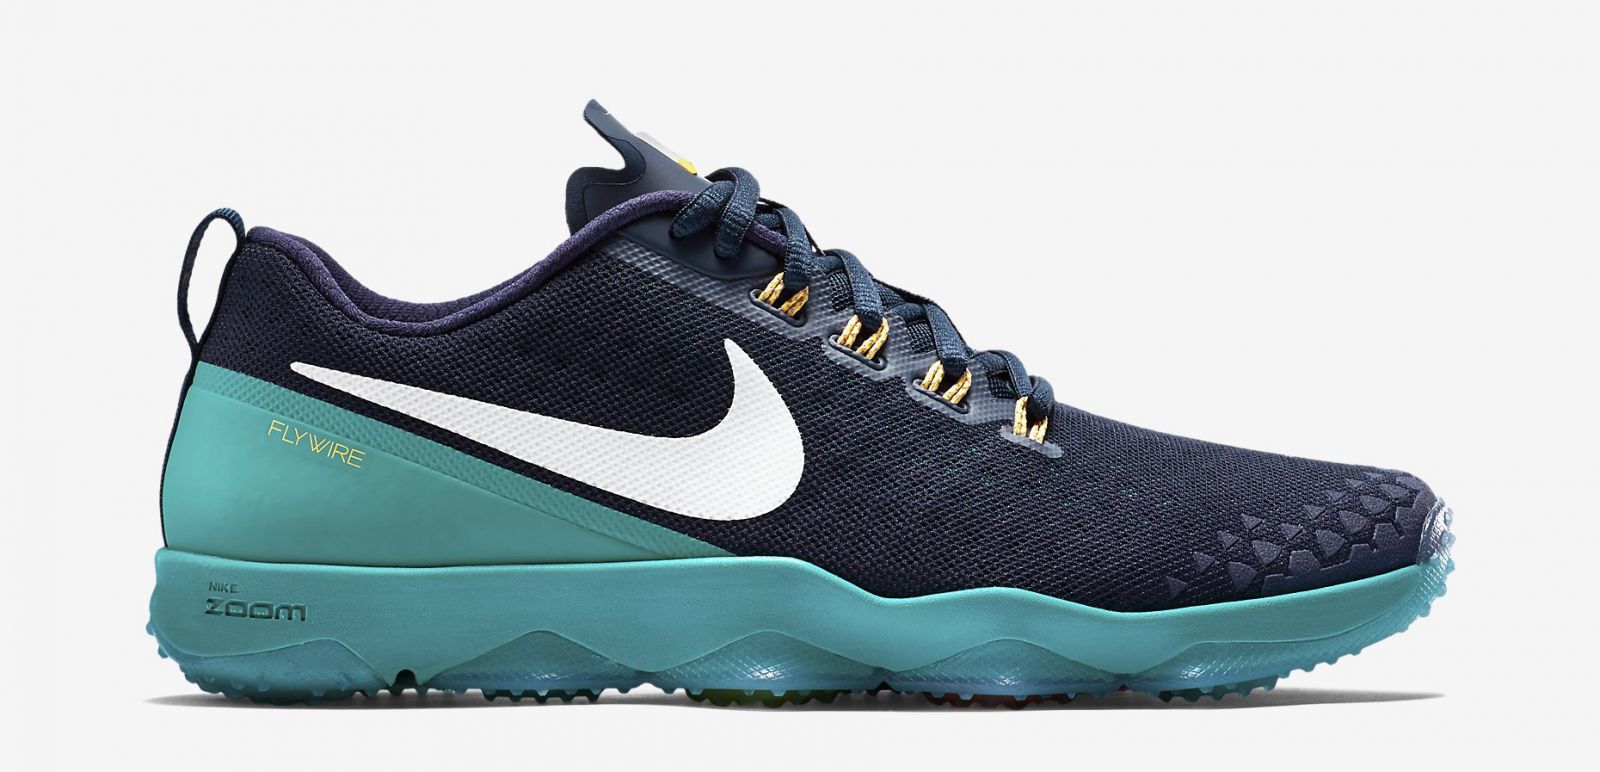 Nike Zoom Cushioning on Latest Trainer | Sole Collector